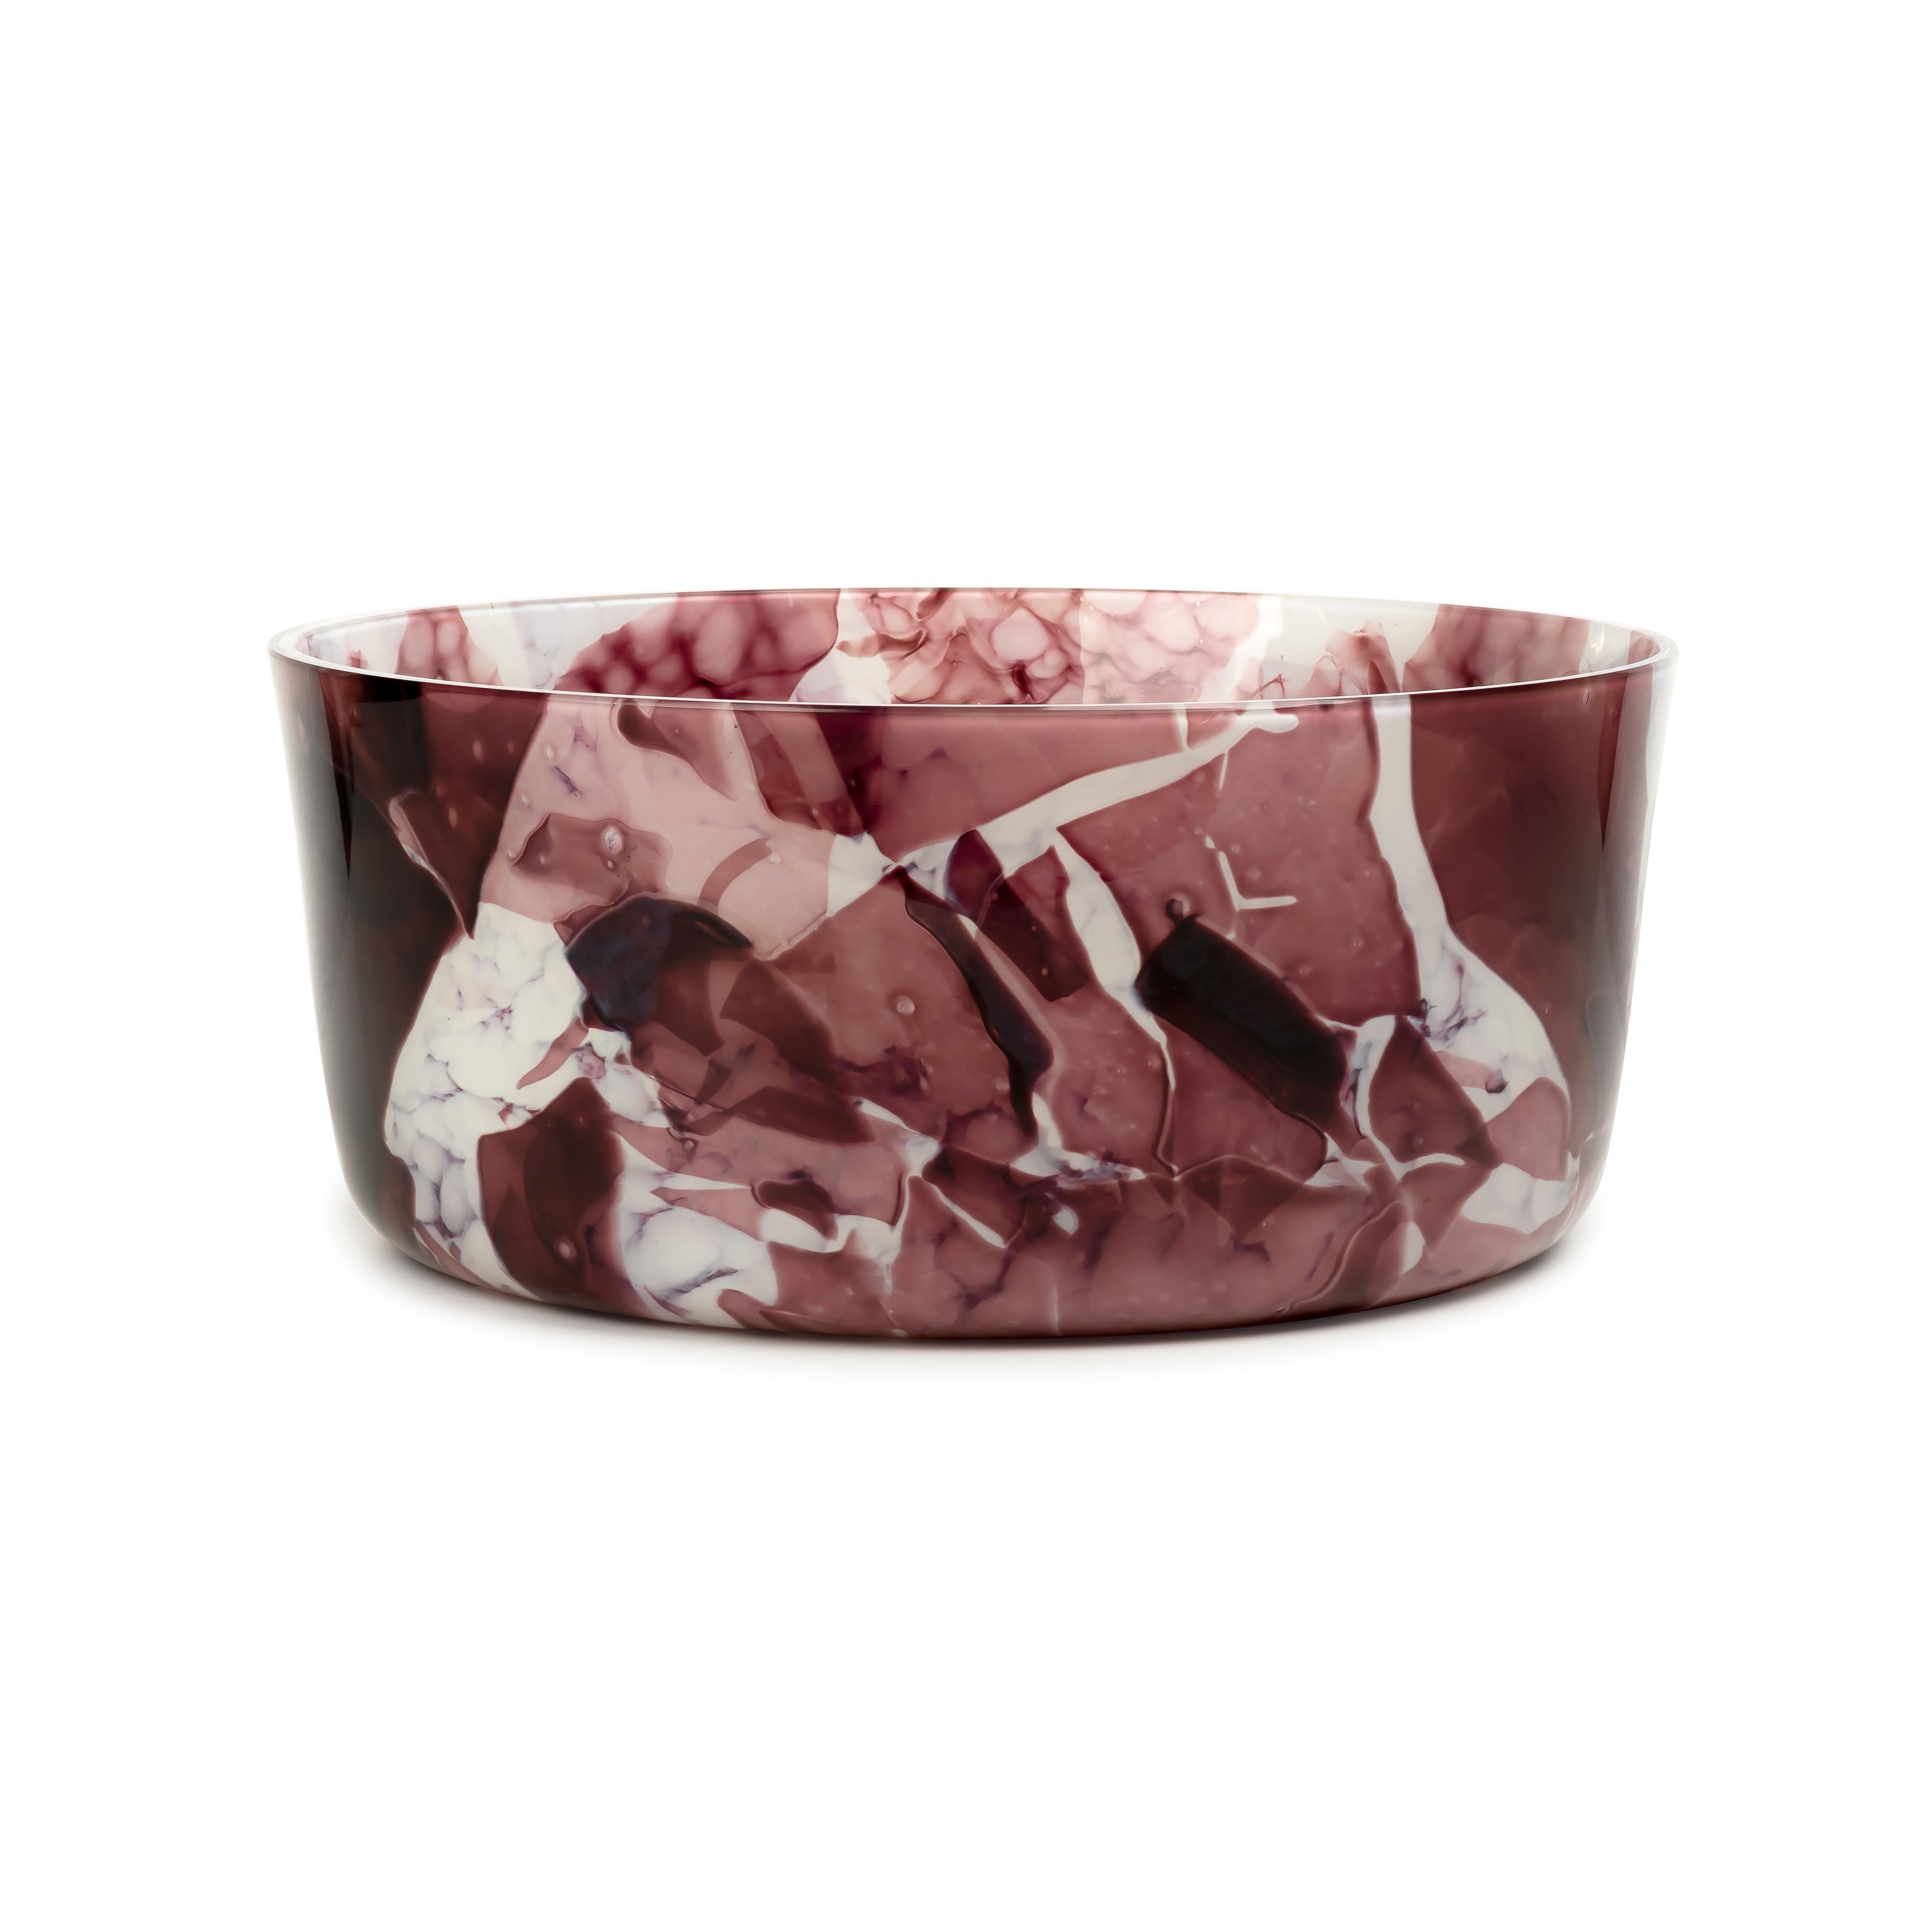 Our glass bowl is meticulously crafted by skilled artisans in Venice. Its stunning amethyst color effortlessly enchants the eyes, bringing a touch of sophistication to any space. Each bowl is meticulously formed using the ancient Murano glassblowing